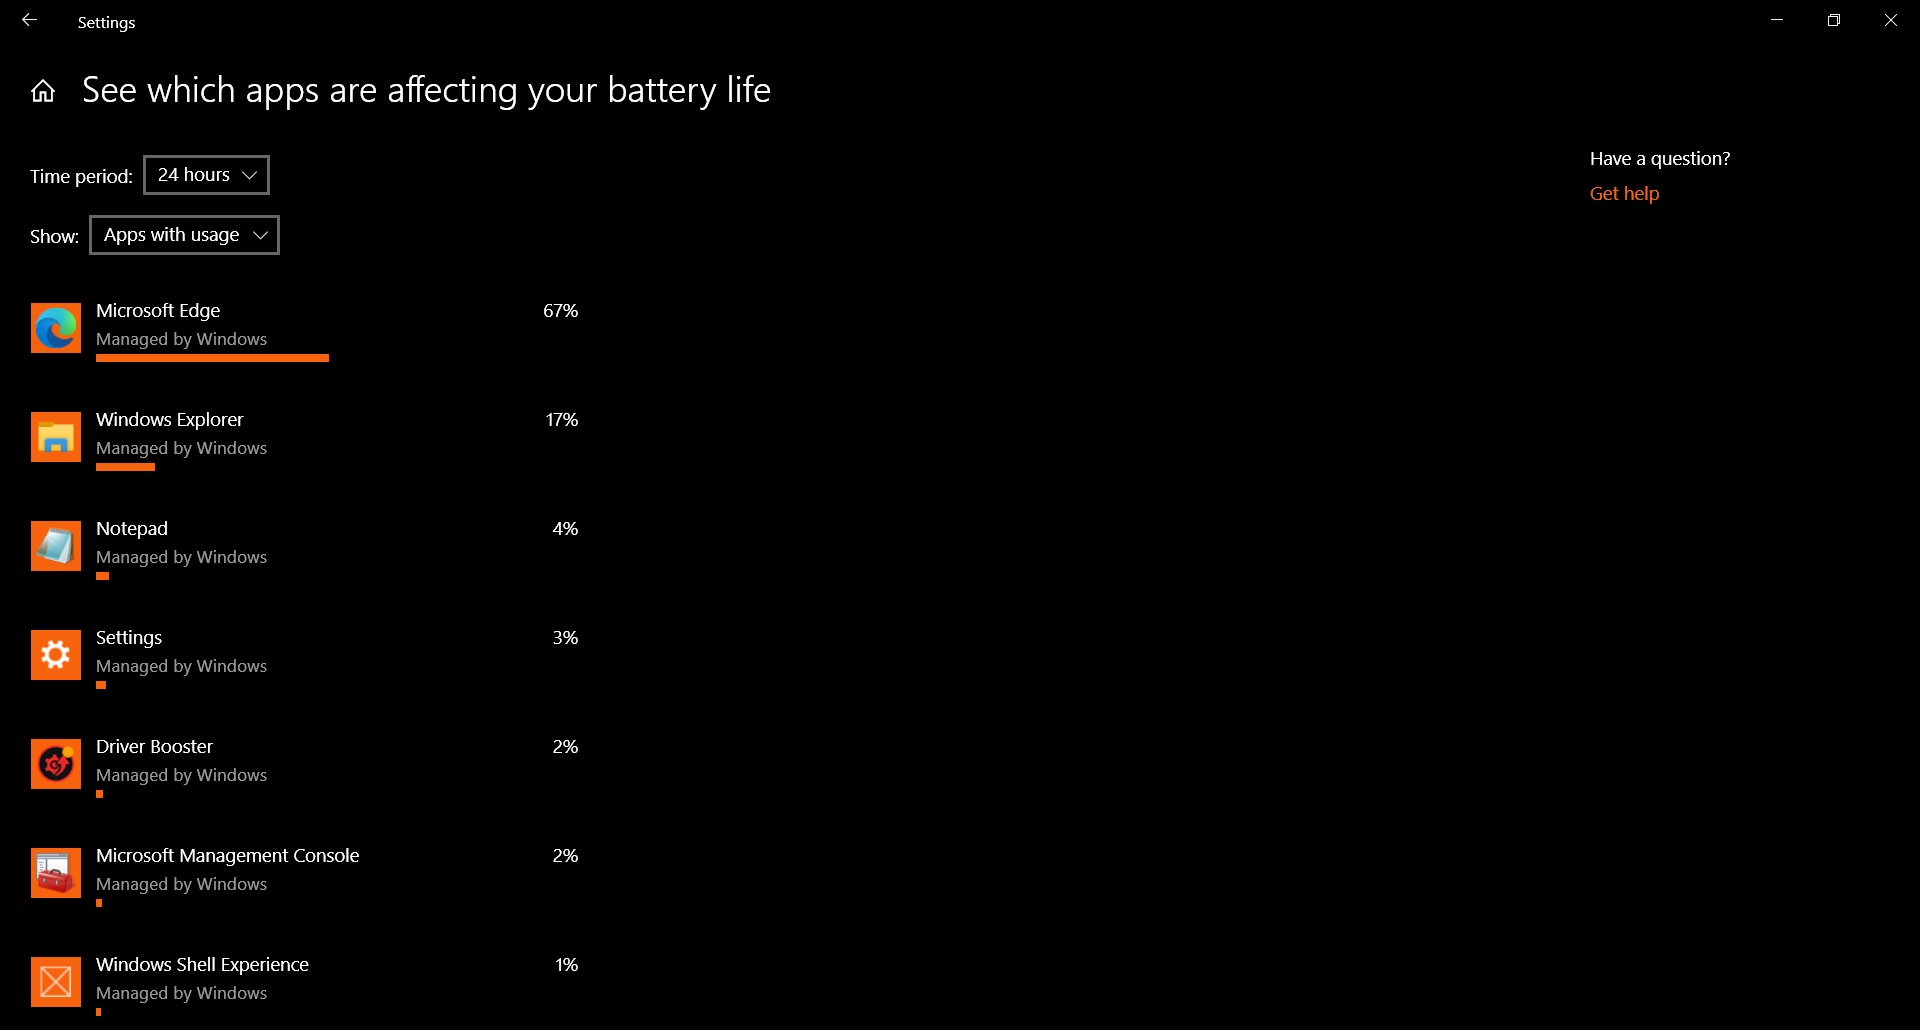 see which apps are affecting your battery life cc91695c-e1d9-424b-a00c-2dfb3c0a0403?upload=true.jpg